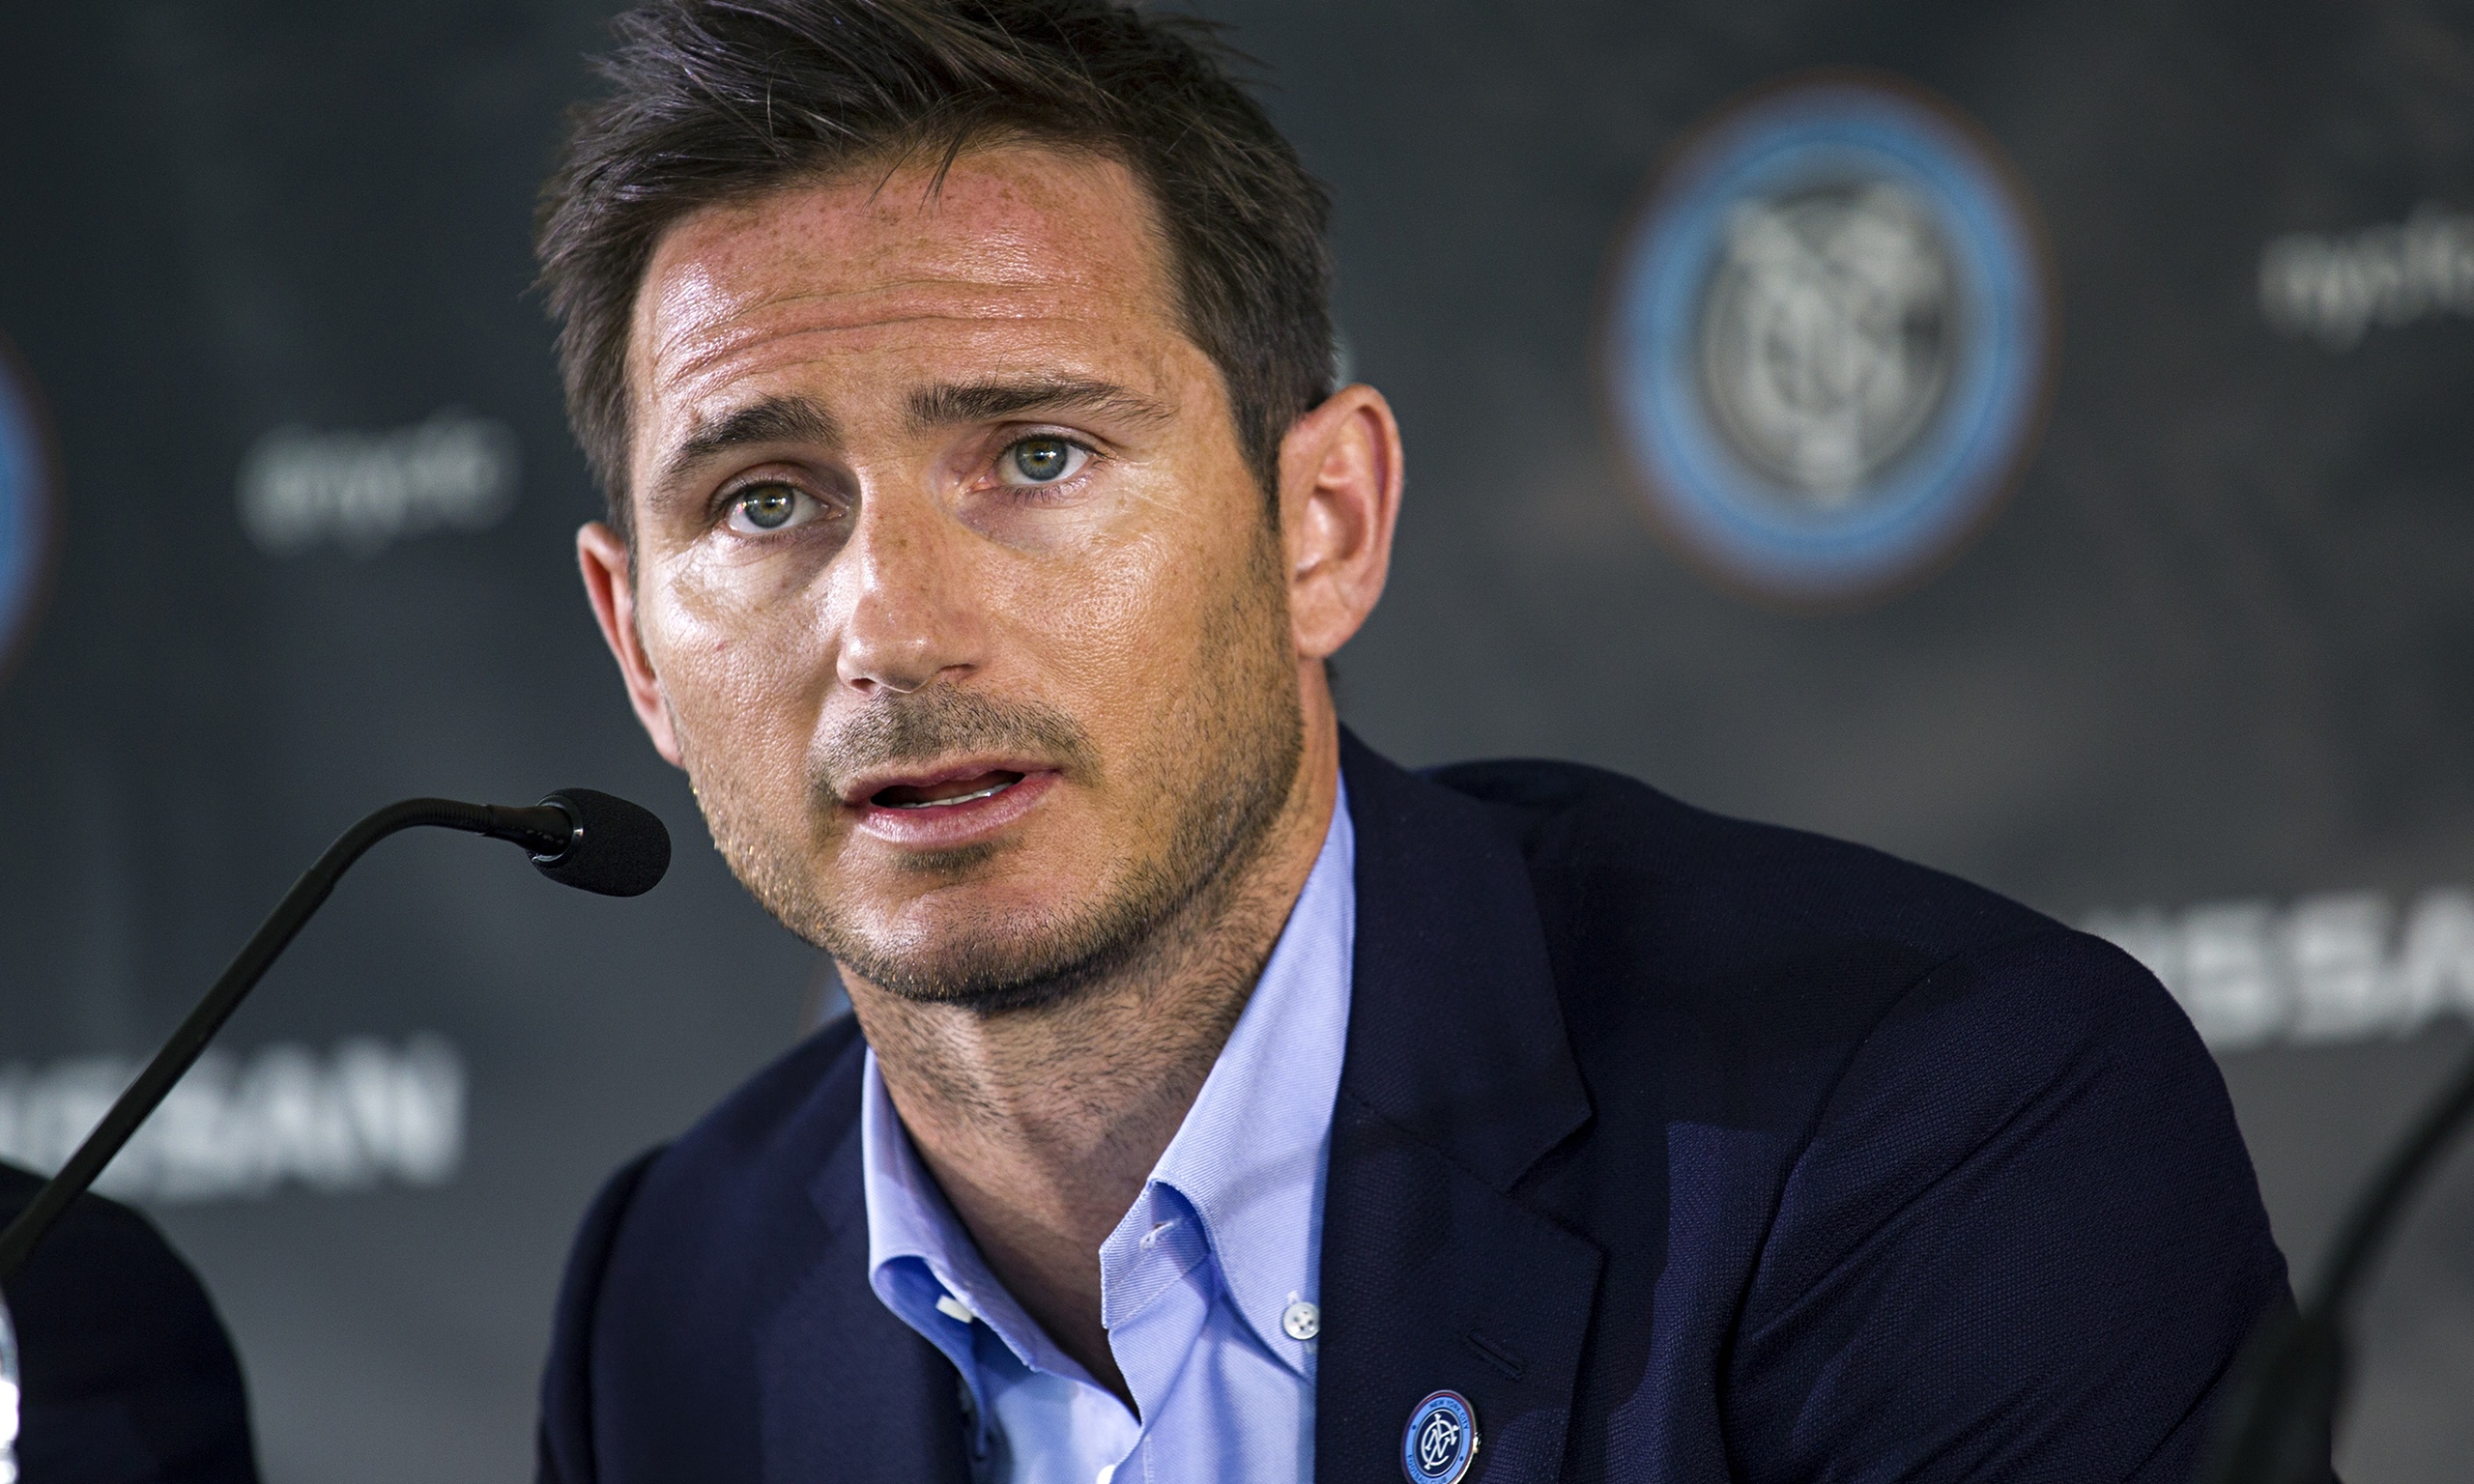 Frank Lampard checks in at New York but refuses to draw line under